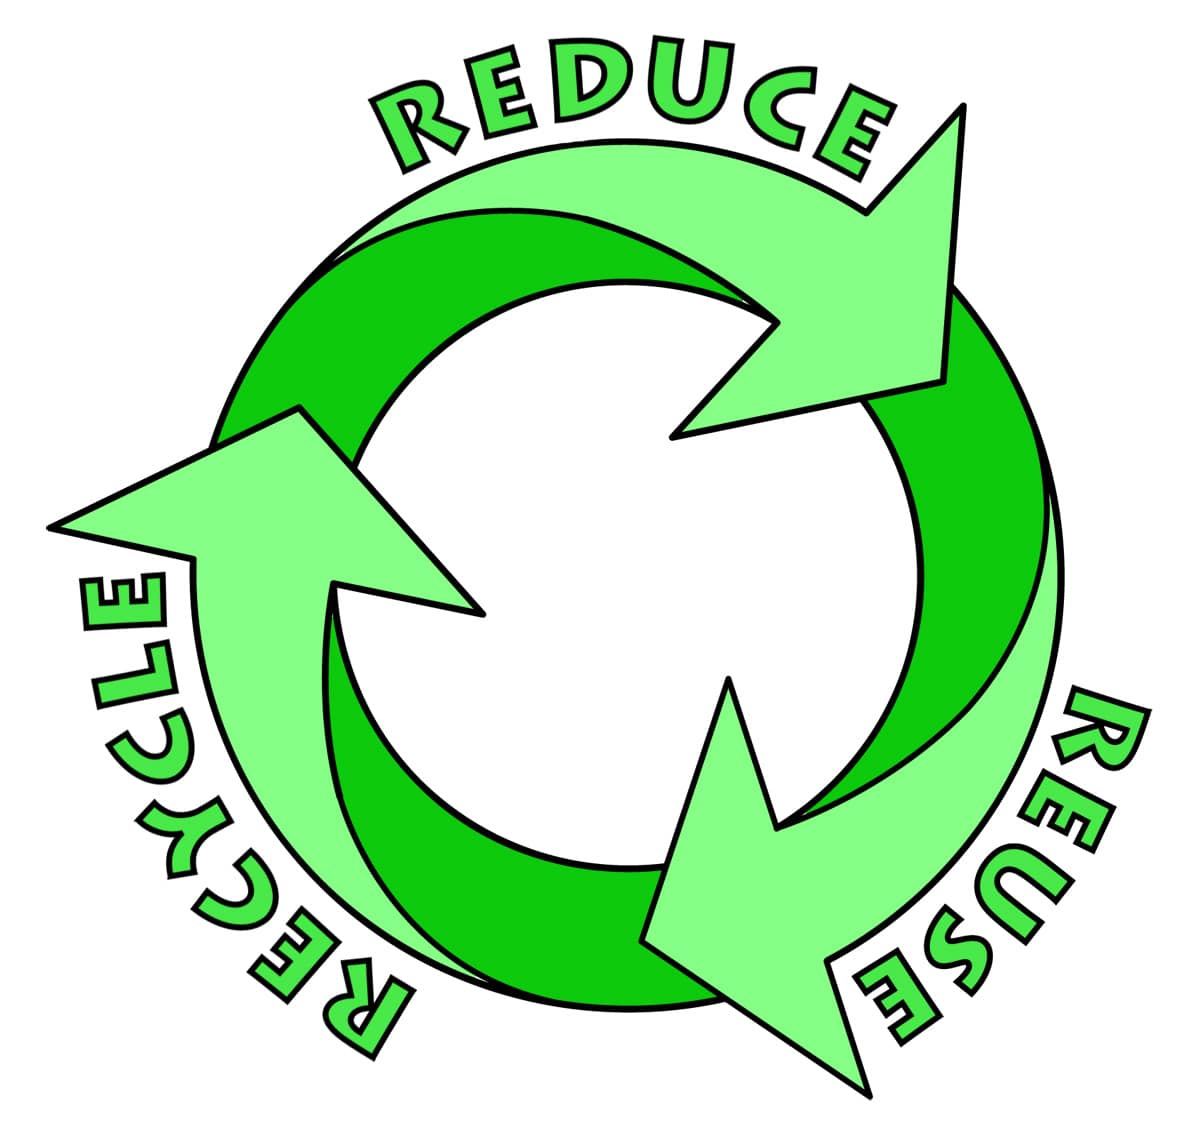 Three R's: Reduce, Reuse, Recycle in West Chicago - SCARCE